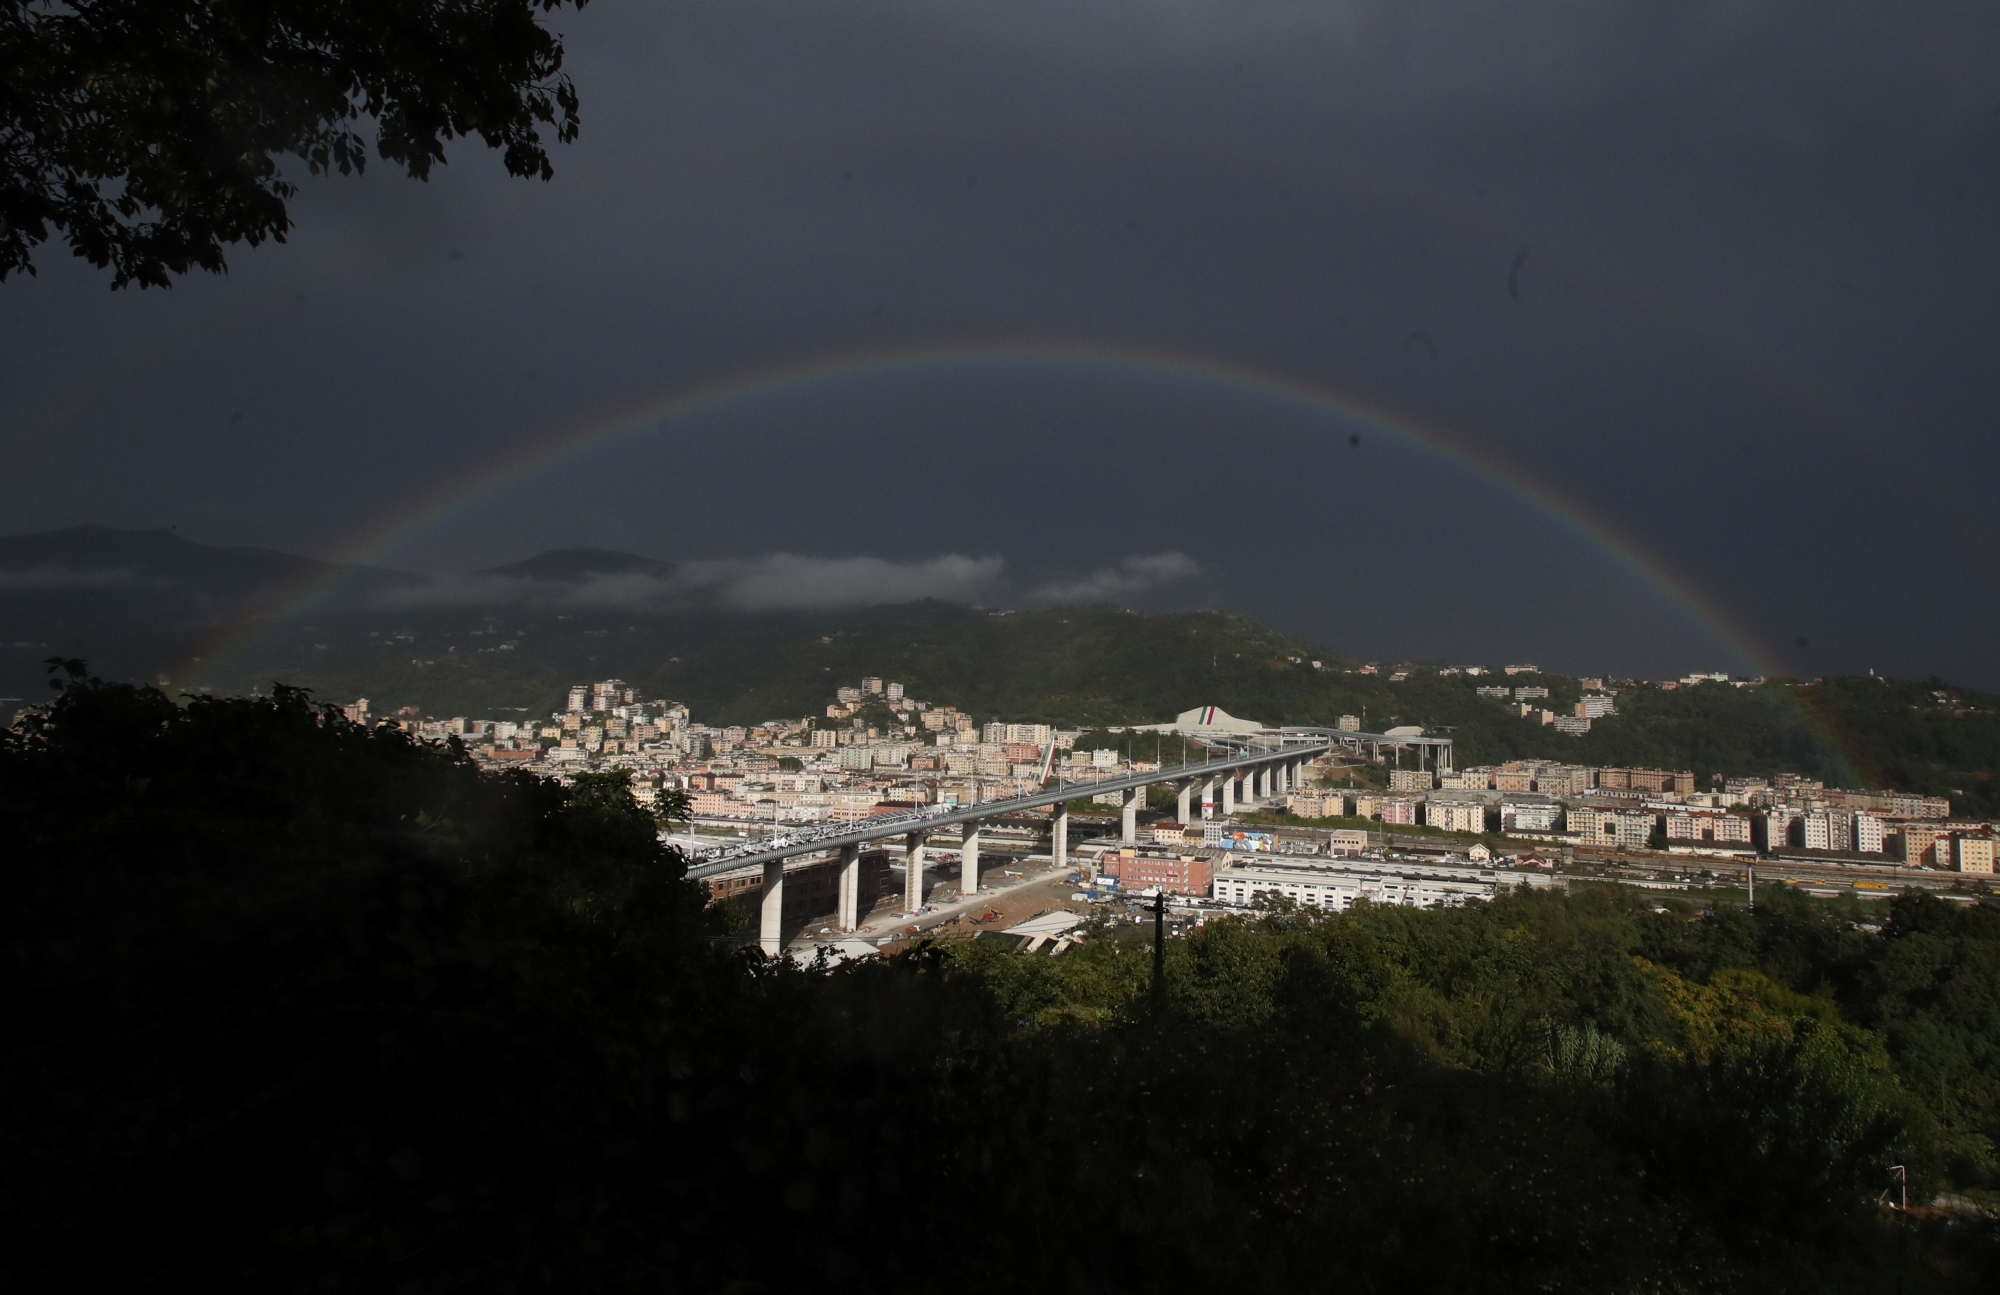 A rainbow shines over the new San Giorgio Bridge in Genoa, Italy, Monday, Aug. 3, 2020. A large section of the old Morandi bridge collapsed on Aug. 14, 2018, killing 43 people and forcing the evacuation of nearby residents from the densely built-up area. (AP Photo/Antonio Calanni) ArcInfo